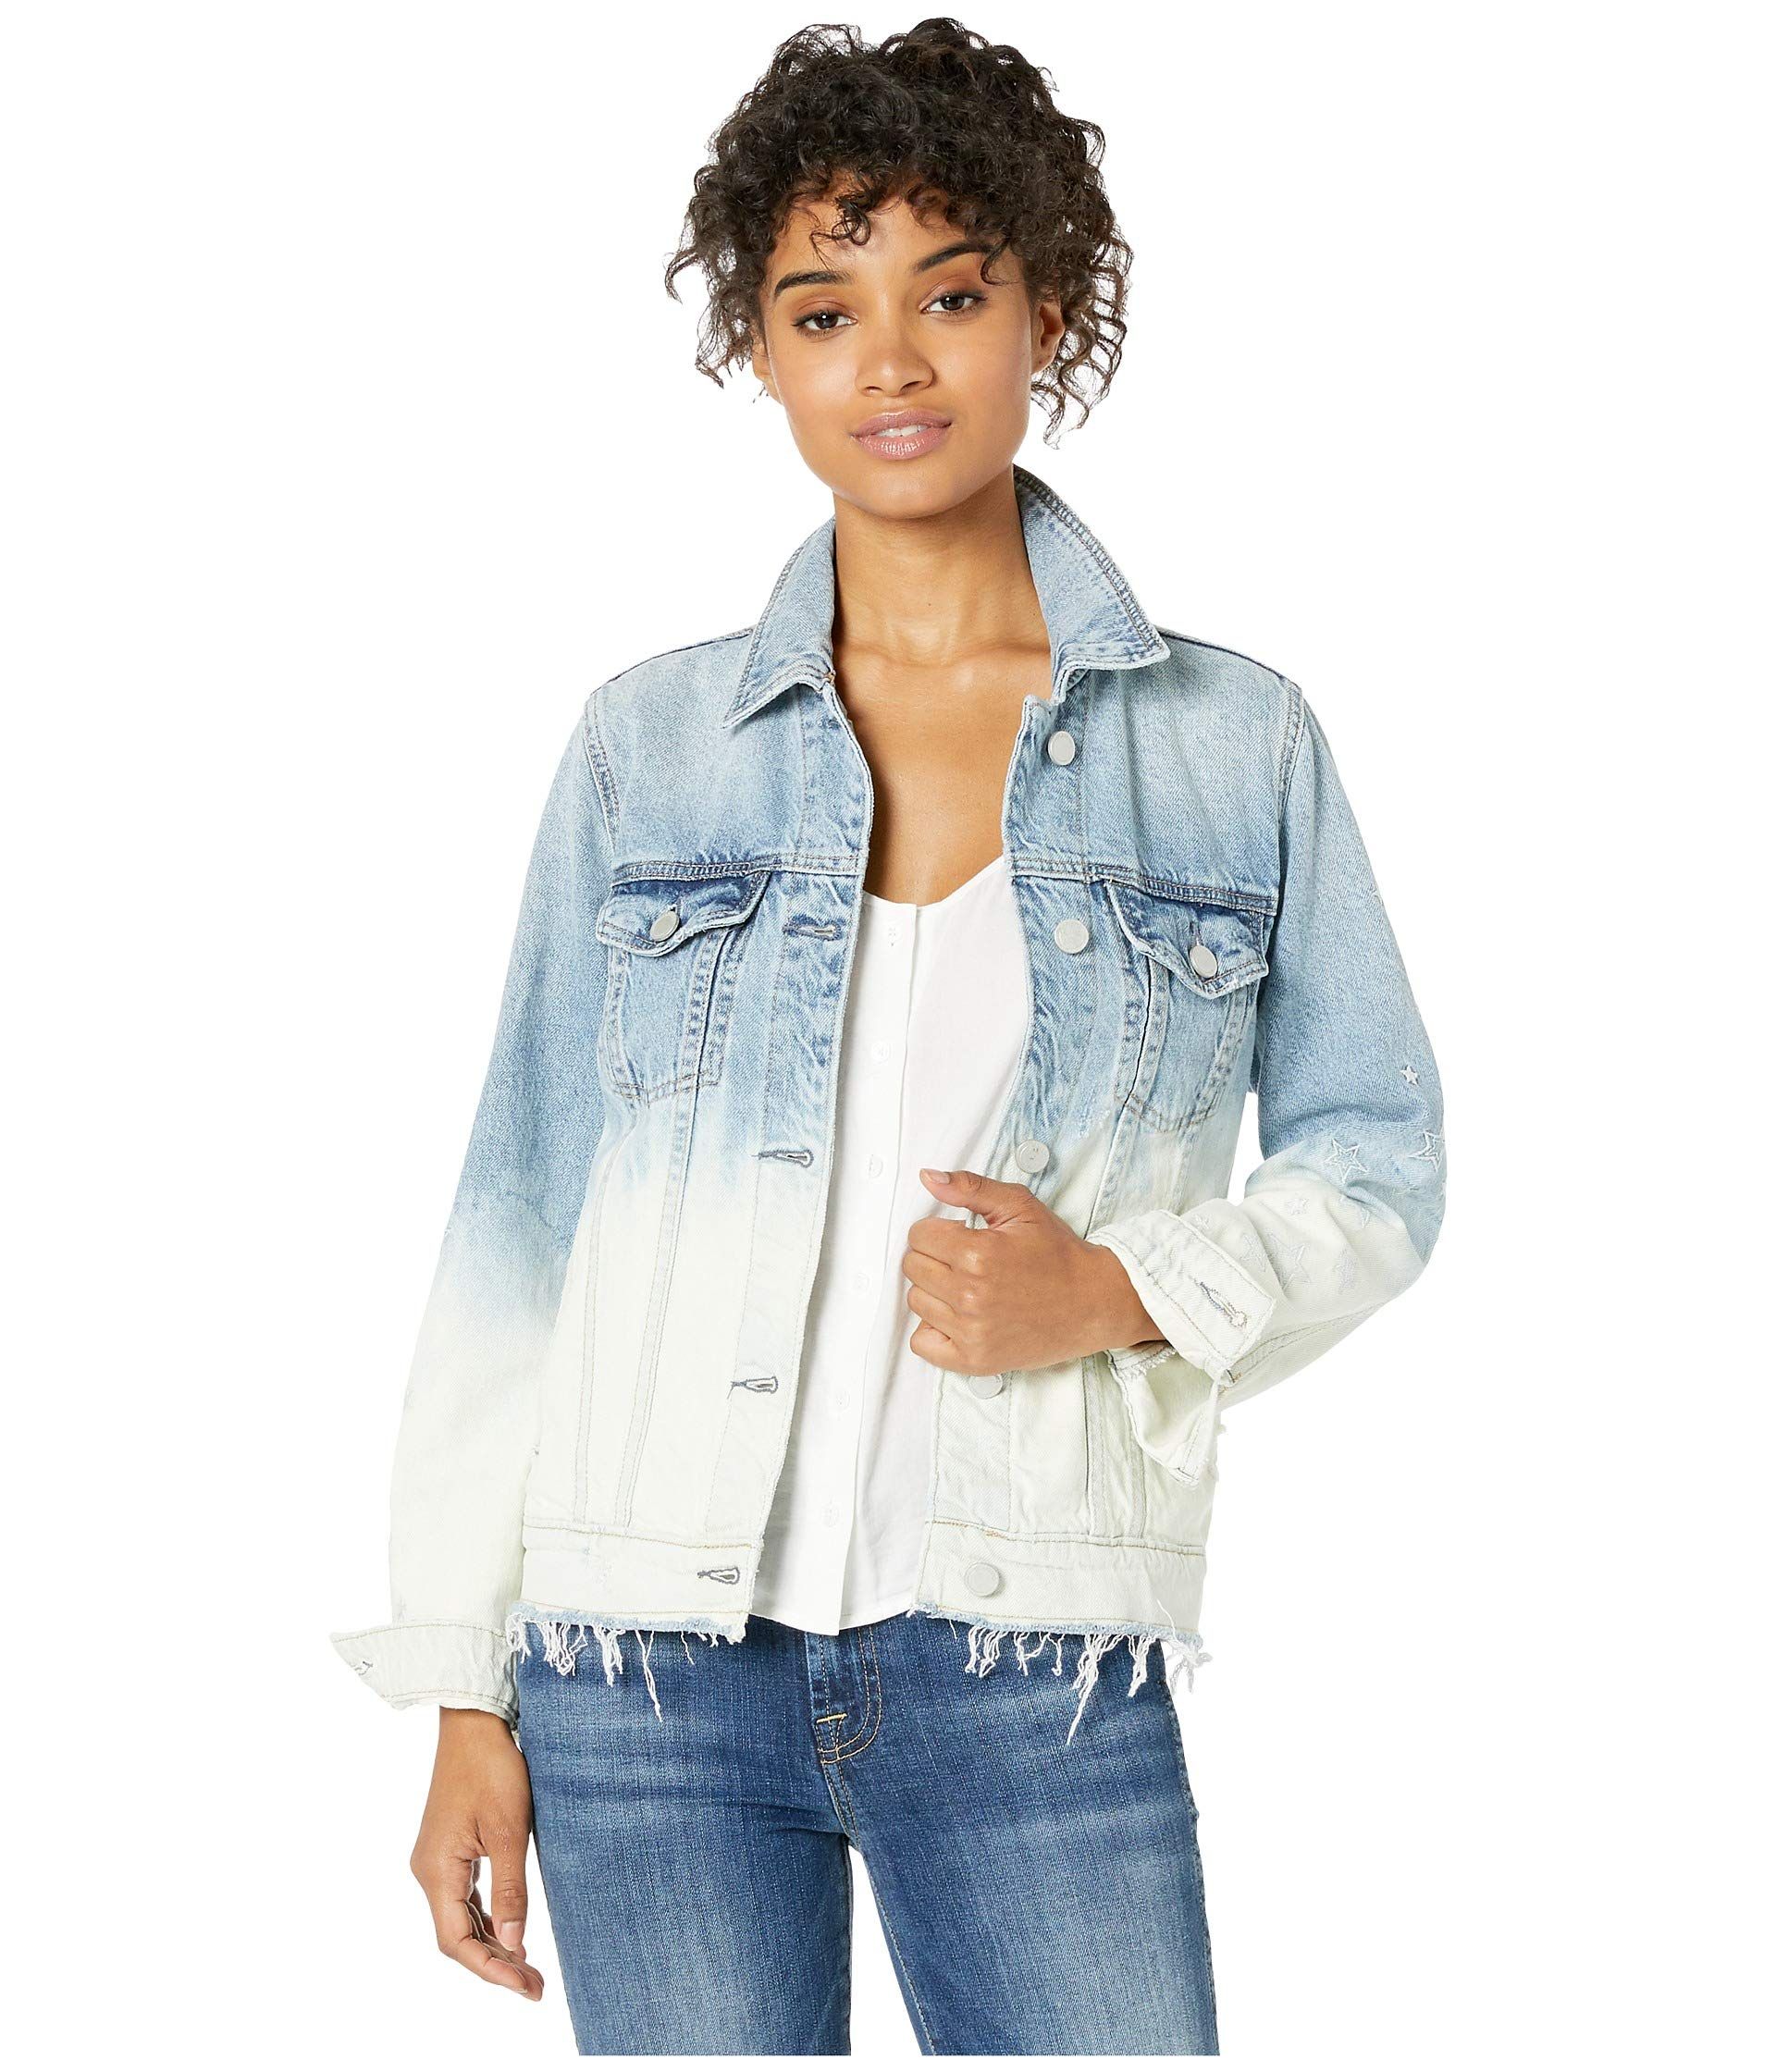 Miladys - A classic denim jacket has the ability to dress up any look from  your favourite winter dress to your comfiest matching tracksuit set. We  love the effortless athleisure look with